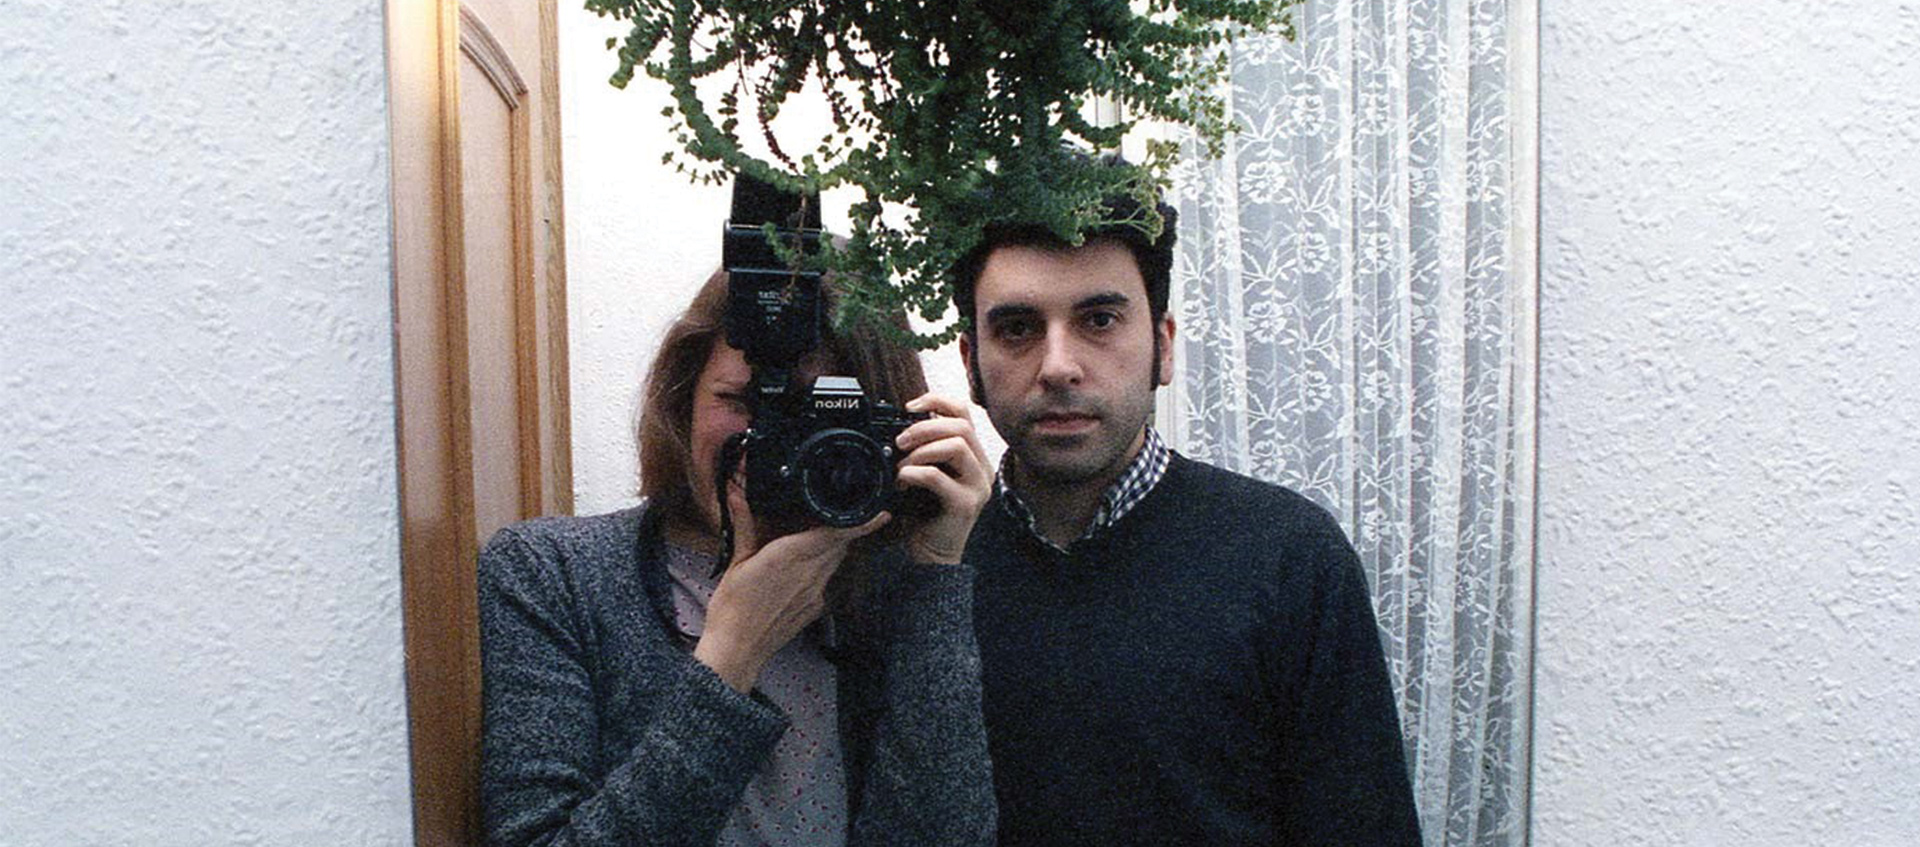 Two people photographed in a mirror